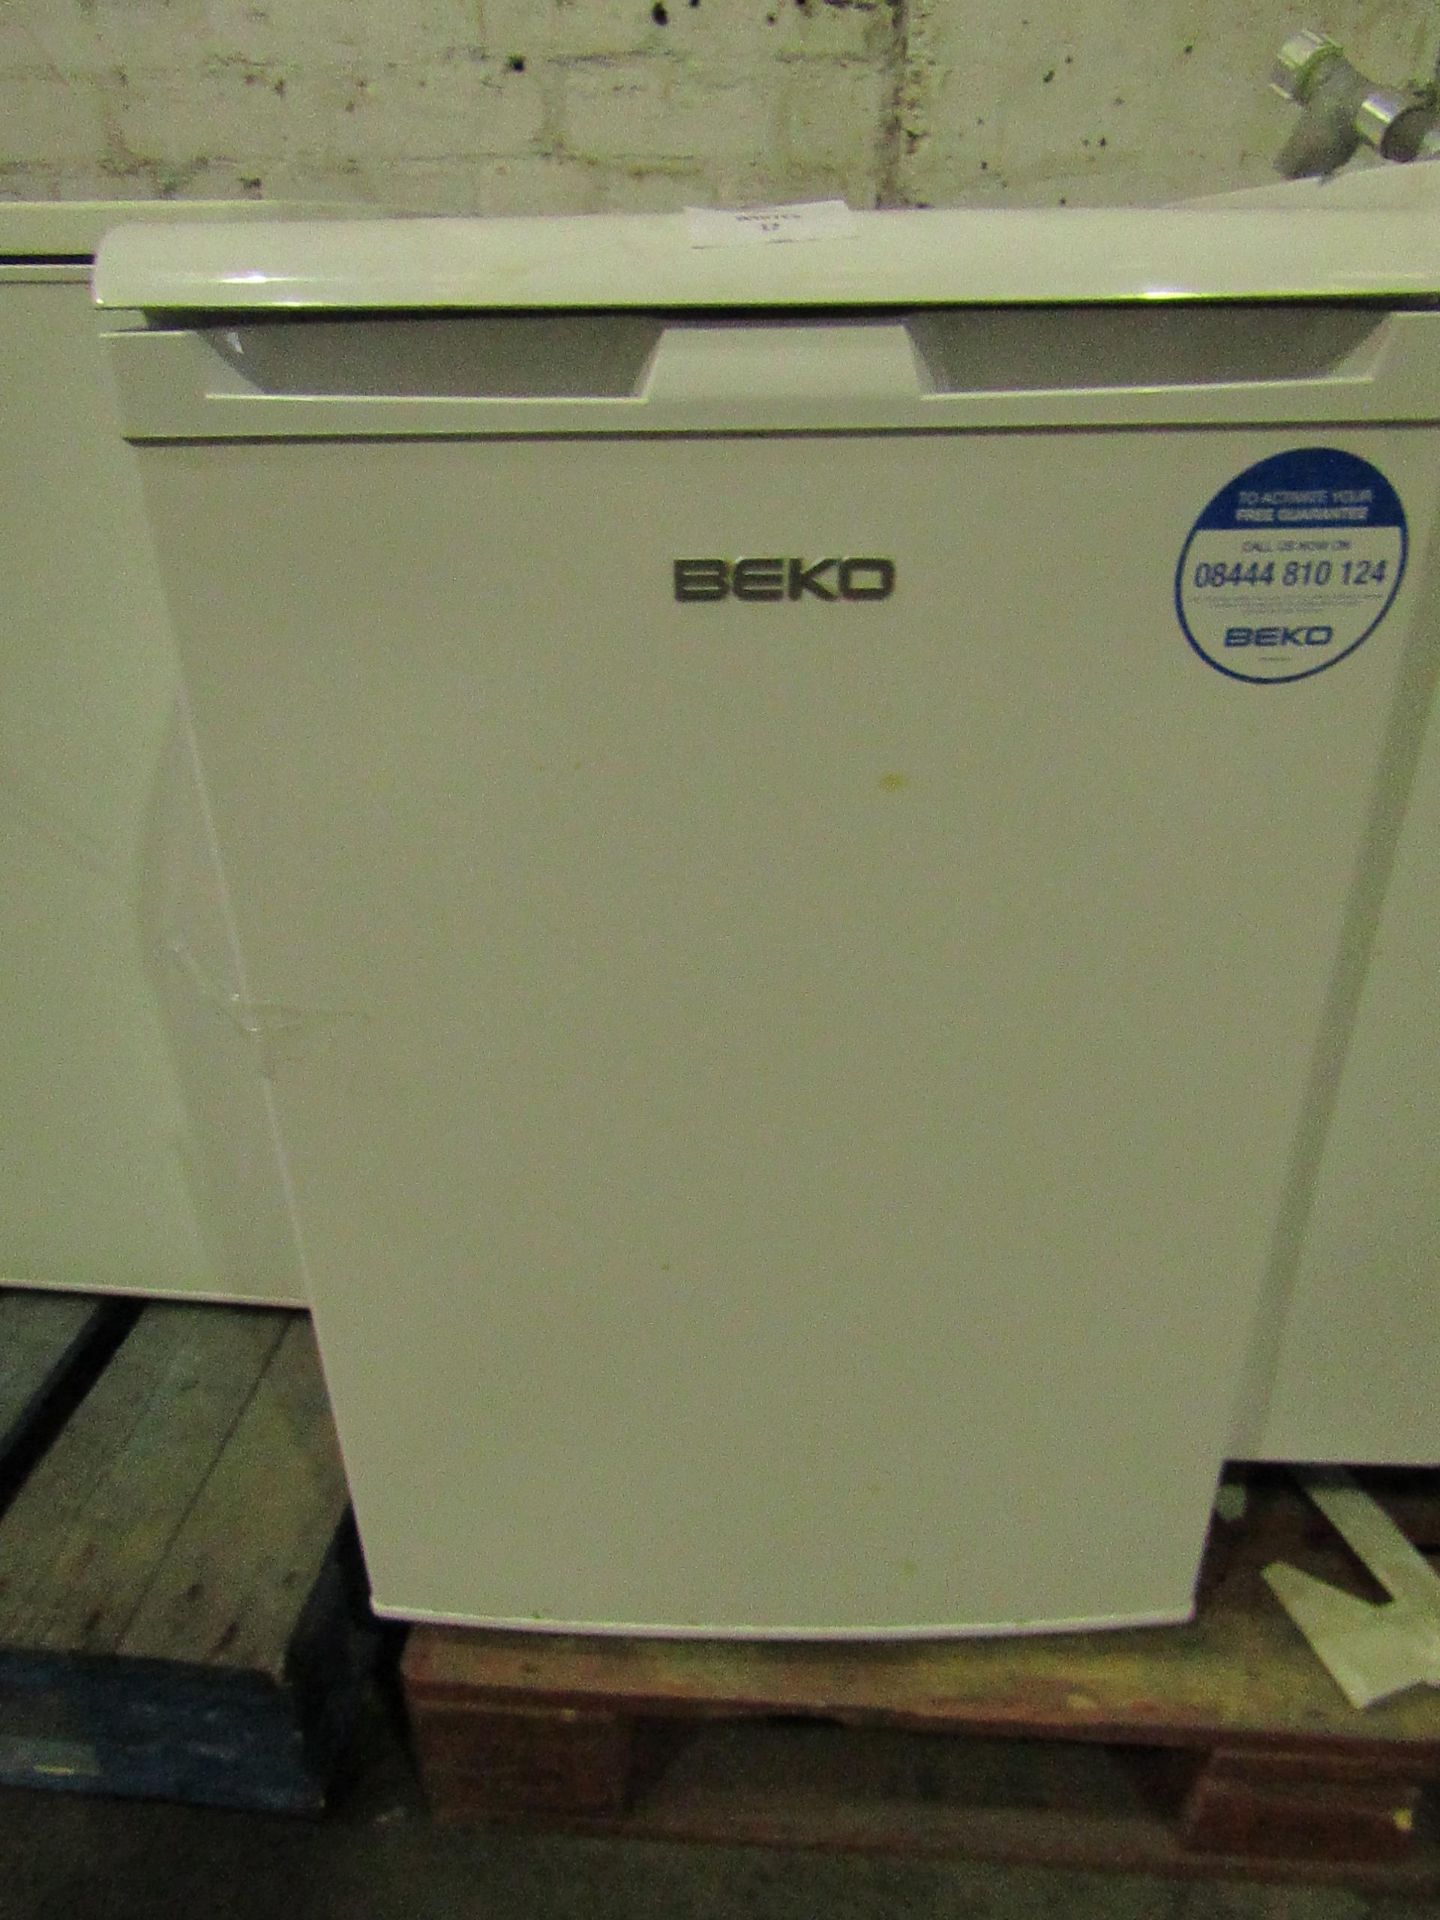 Beko - UnderCounter White Freezer - Item Powers On But Does Not Get Cold.